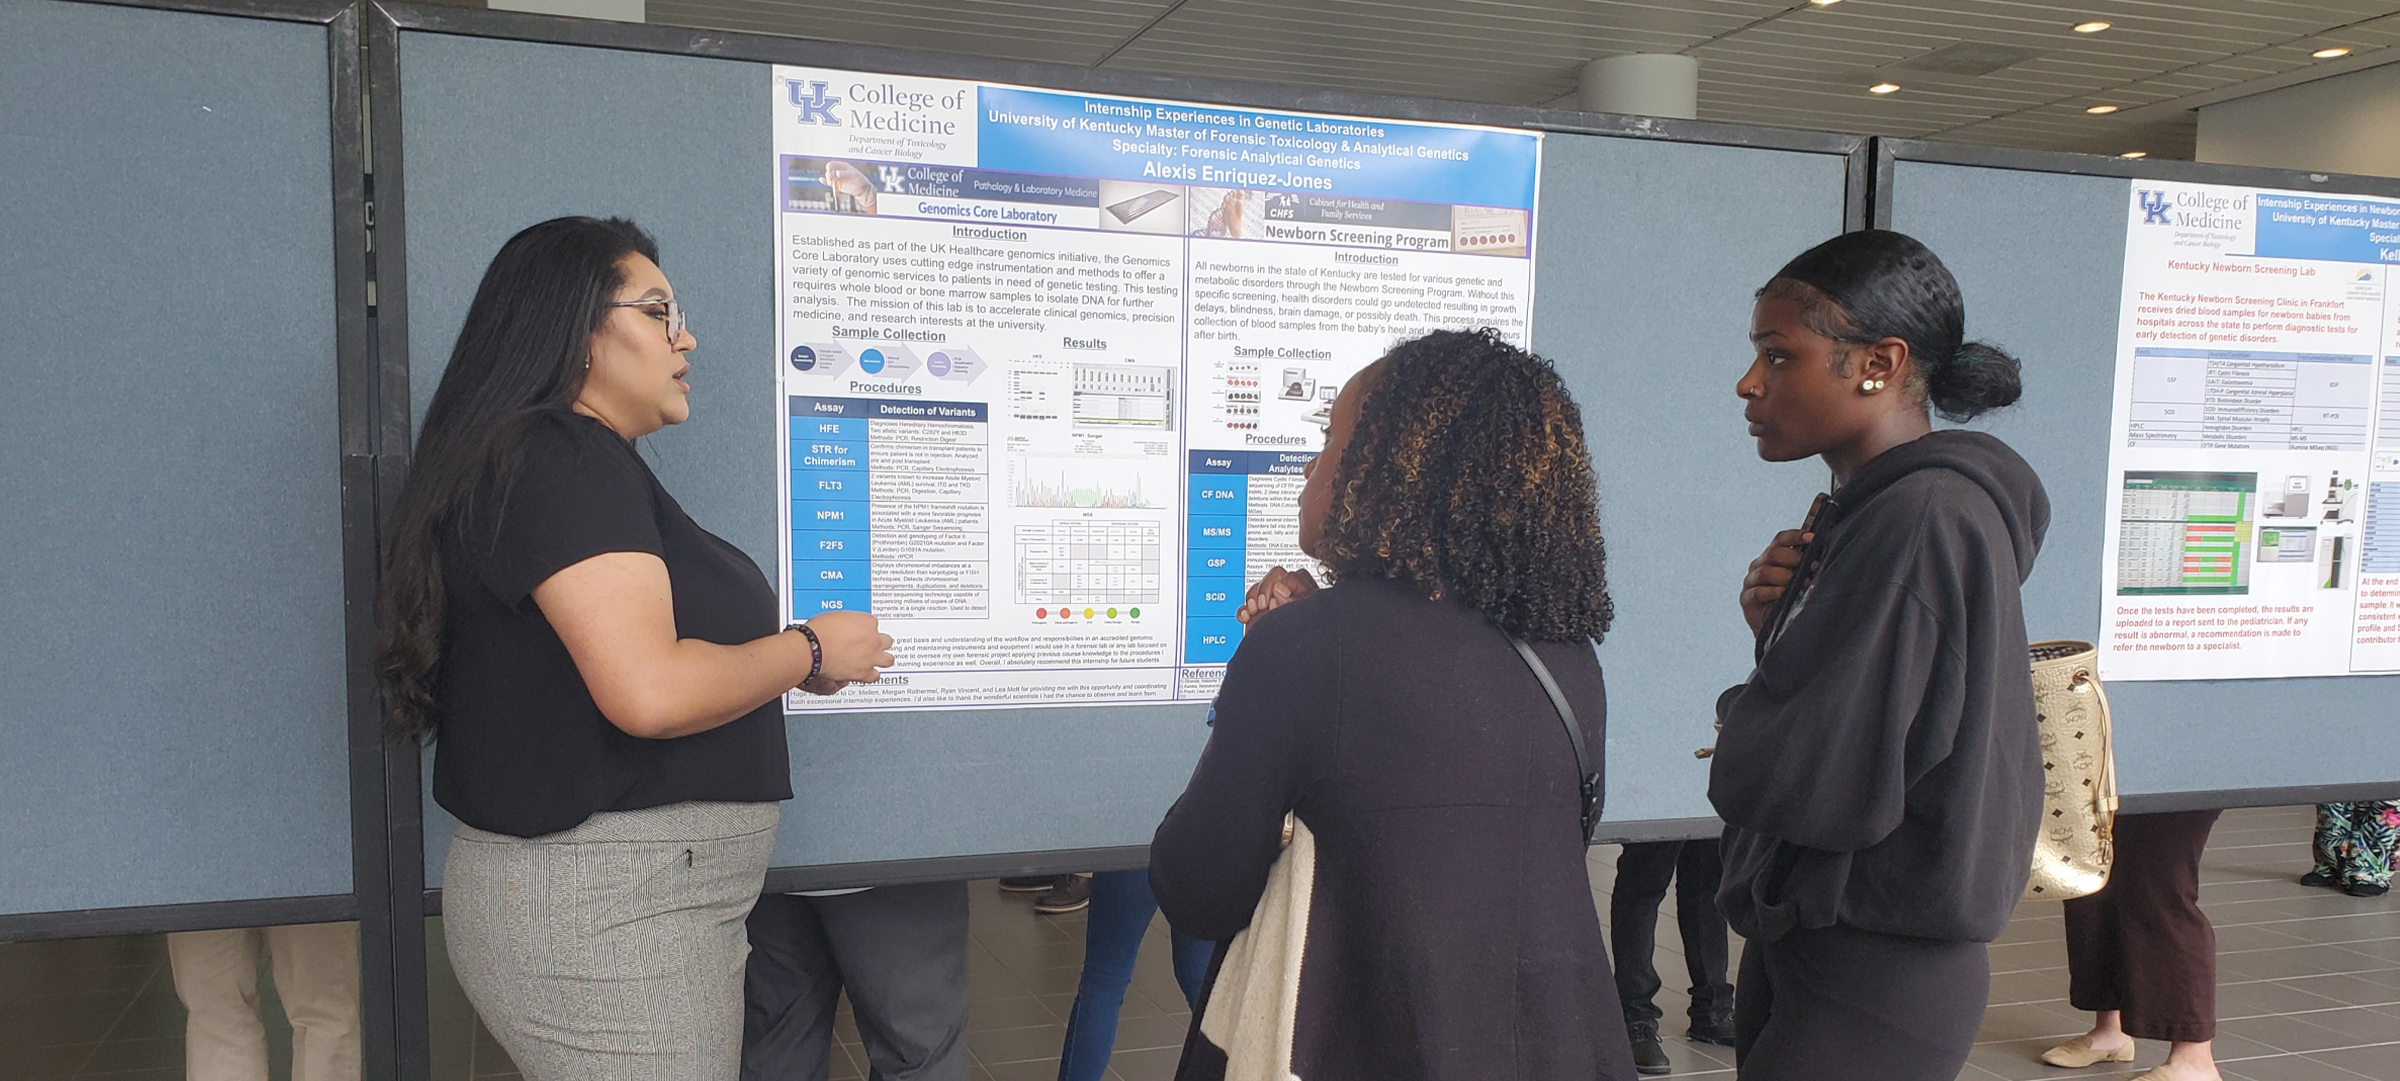 Interns presenting posters at a College of Medicine event.